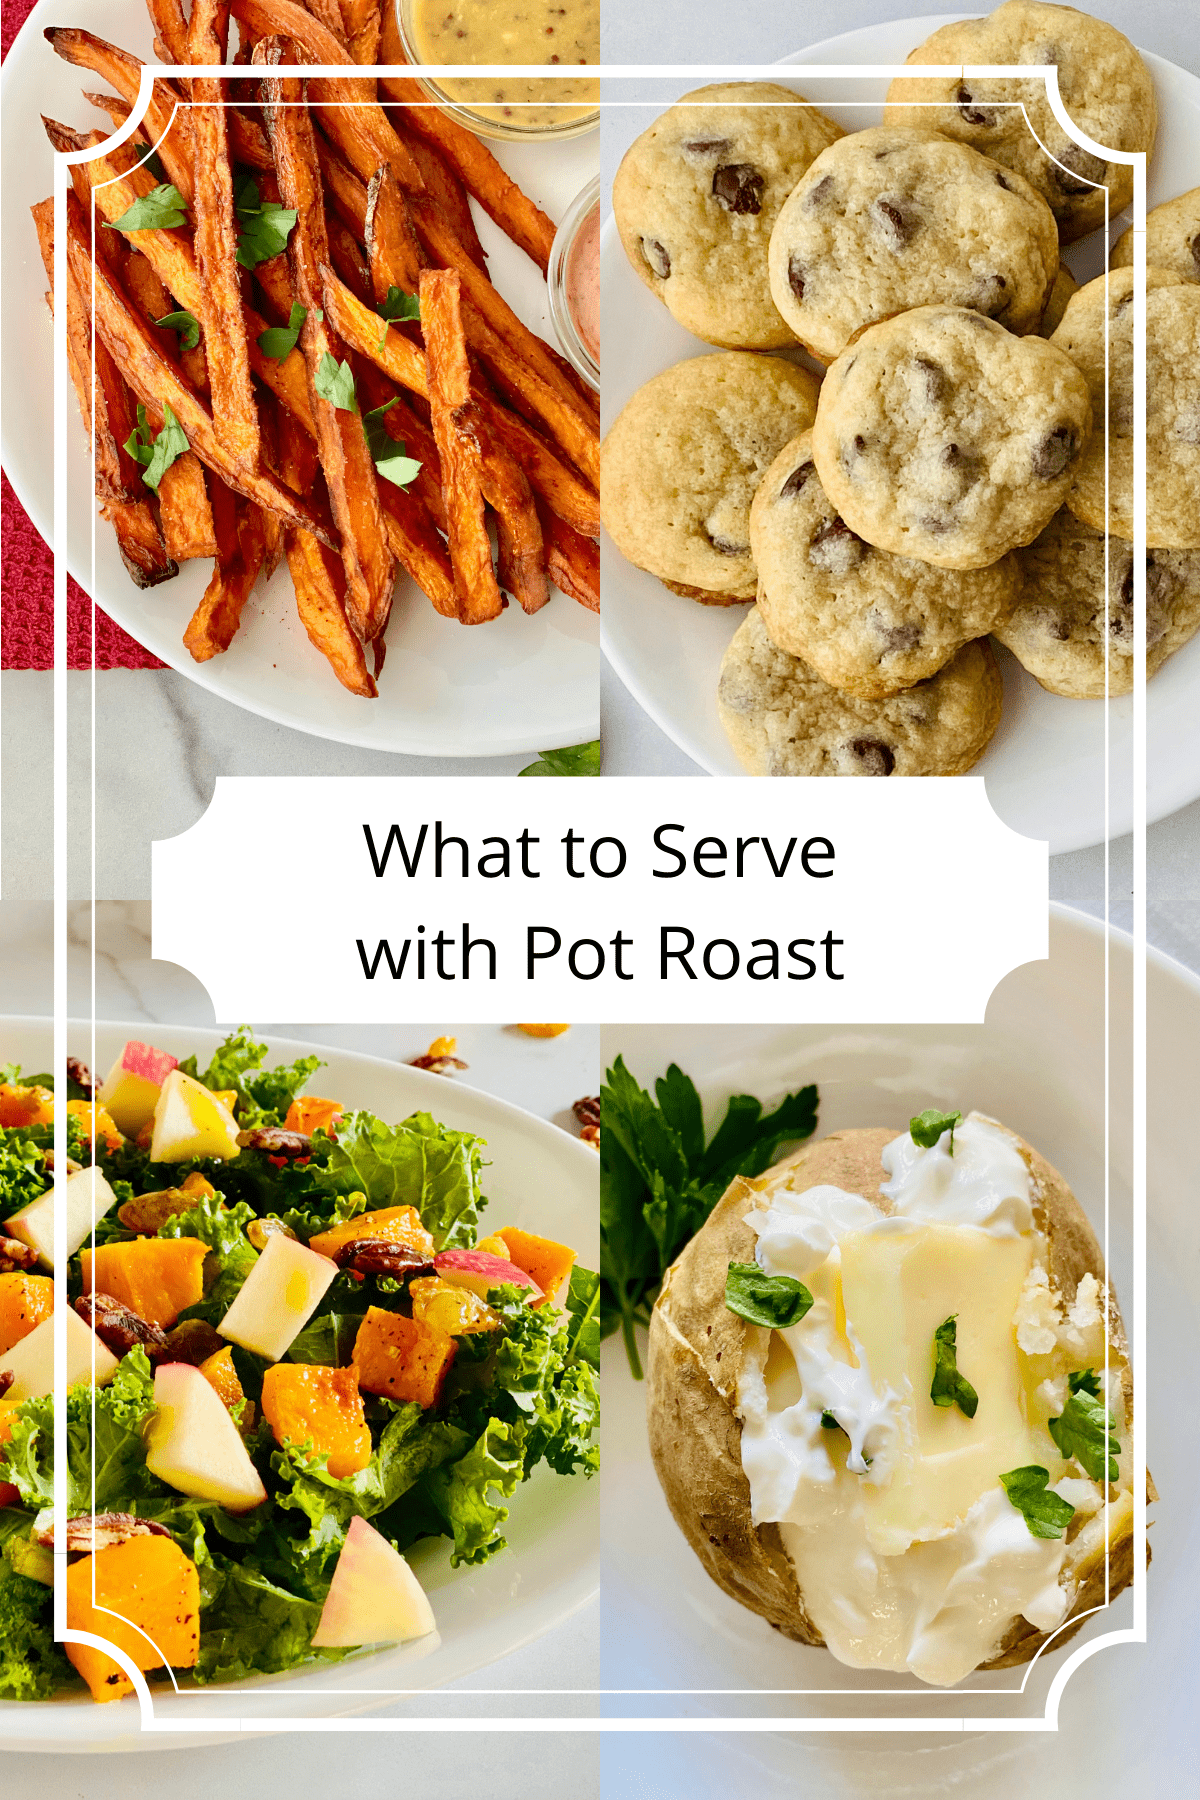 4 recipe images for sweet potato fries, chocolate chip cookies, kale apple salad, and baked potato